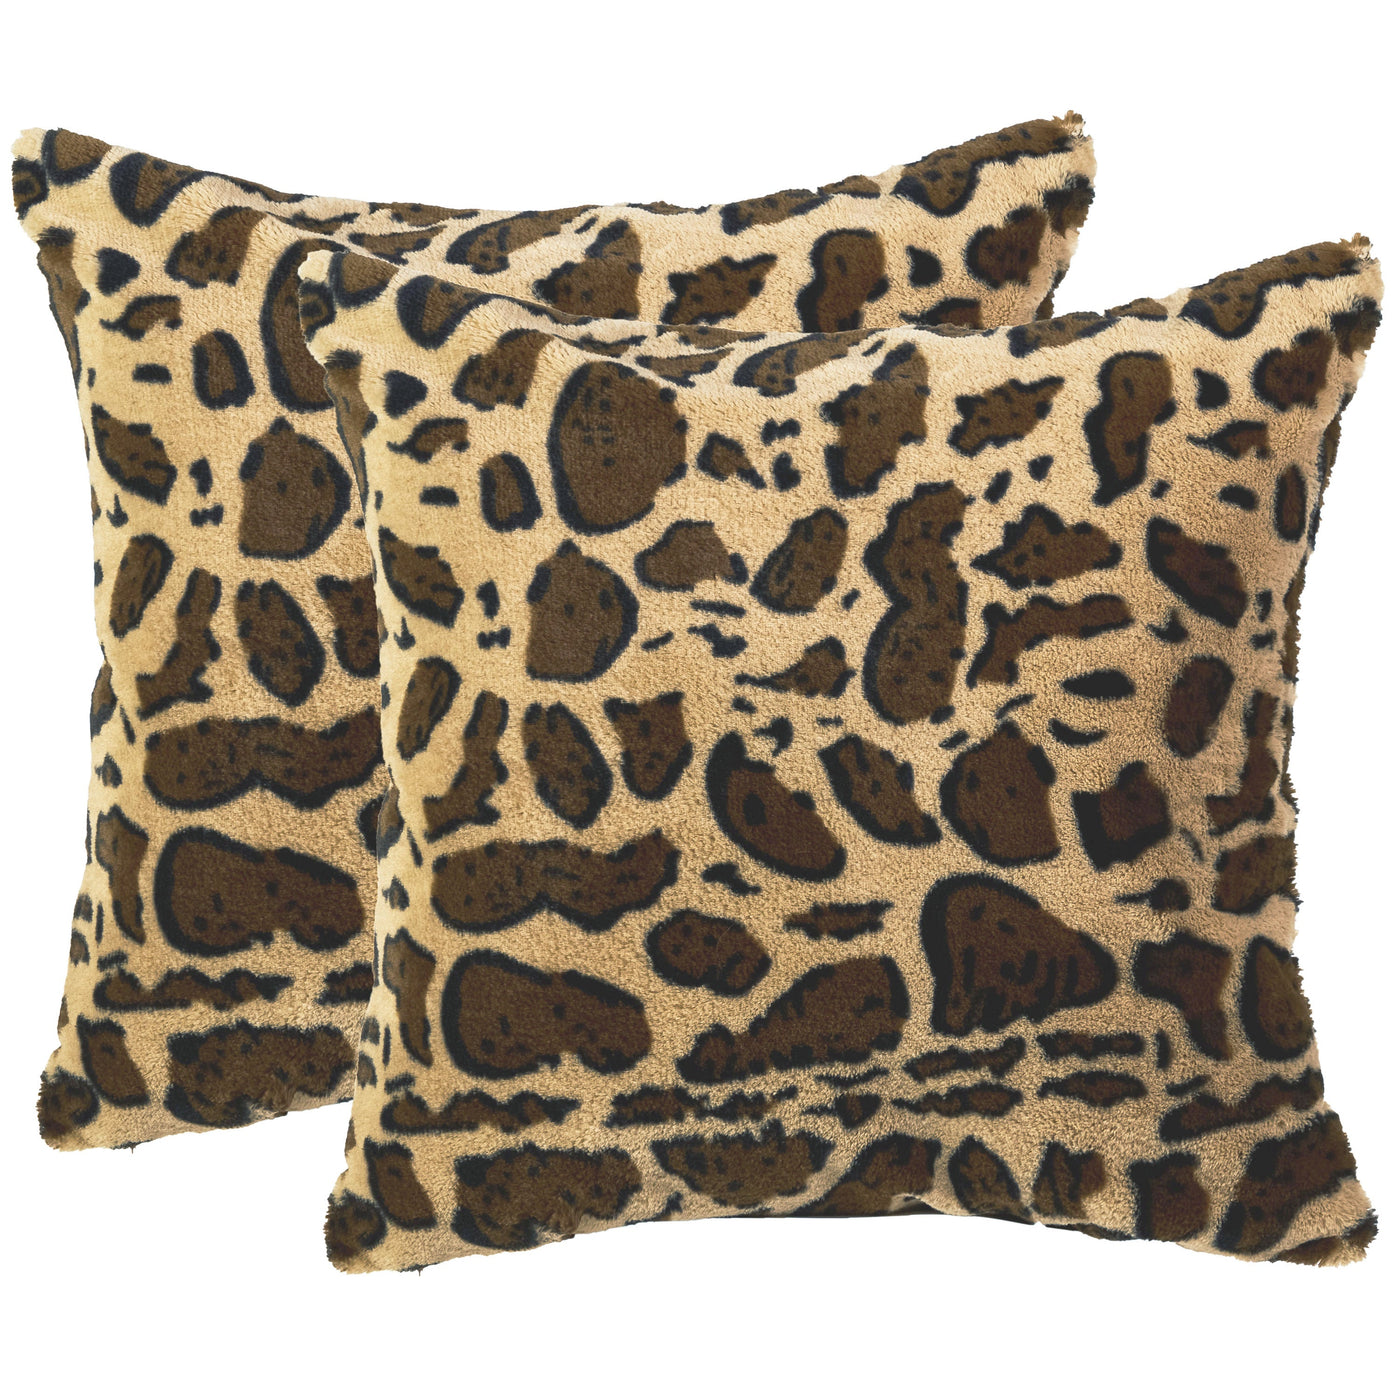 Cheer Collection Faux Fur Pillows - Decorative Throw Pillows for Couch &  Bed - Machine Washable - 18 x 18 - Chocolate (Set of 2)